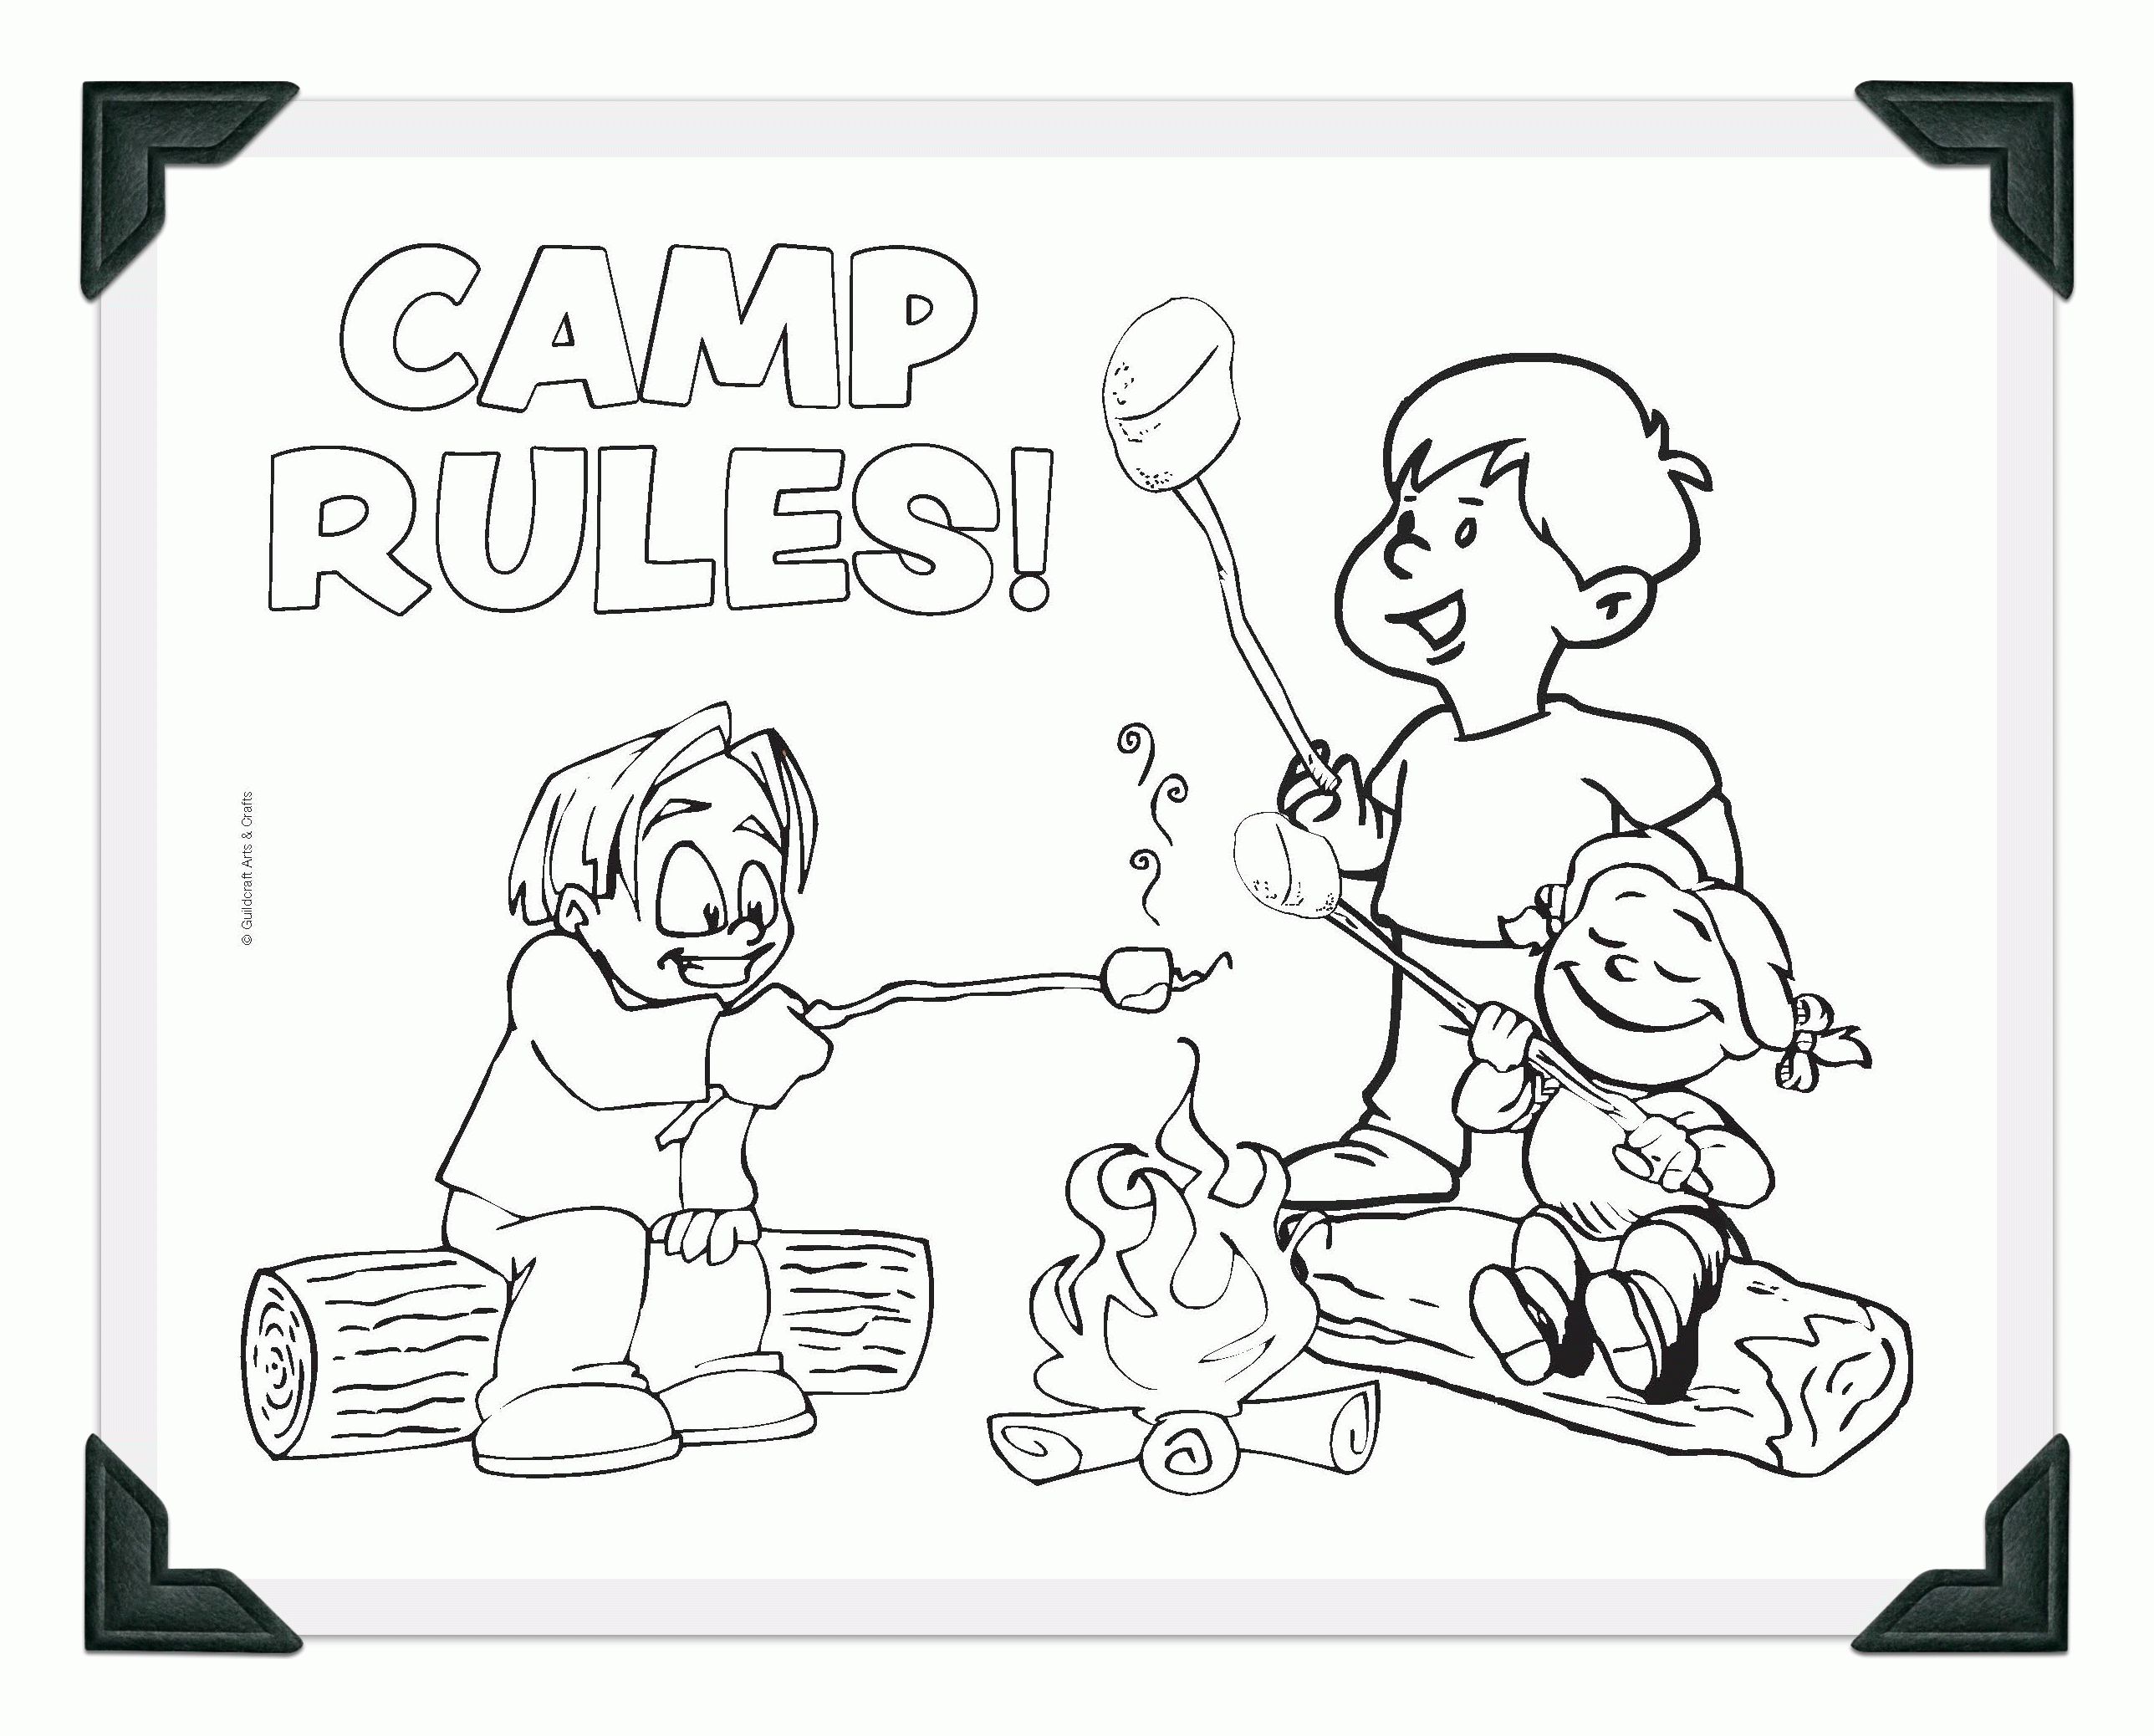 Camping Printable - Coloring Pages for Kids and for Adults